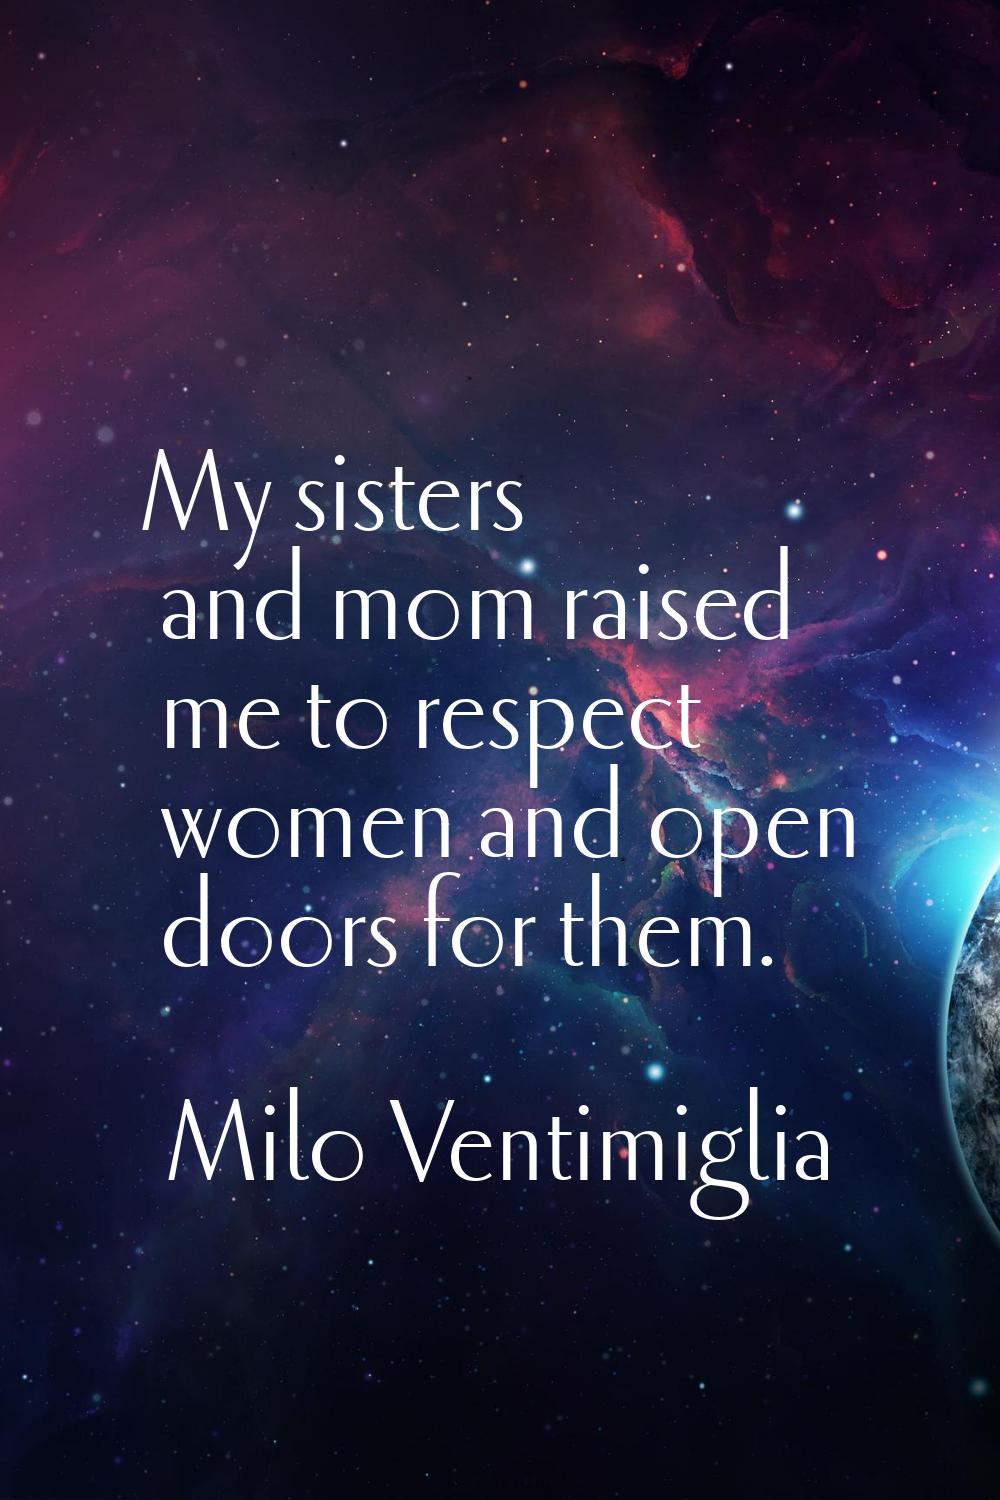 My sisters and mom raised me to respect women and open doors for them.